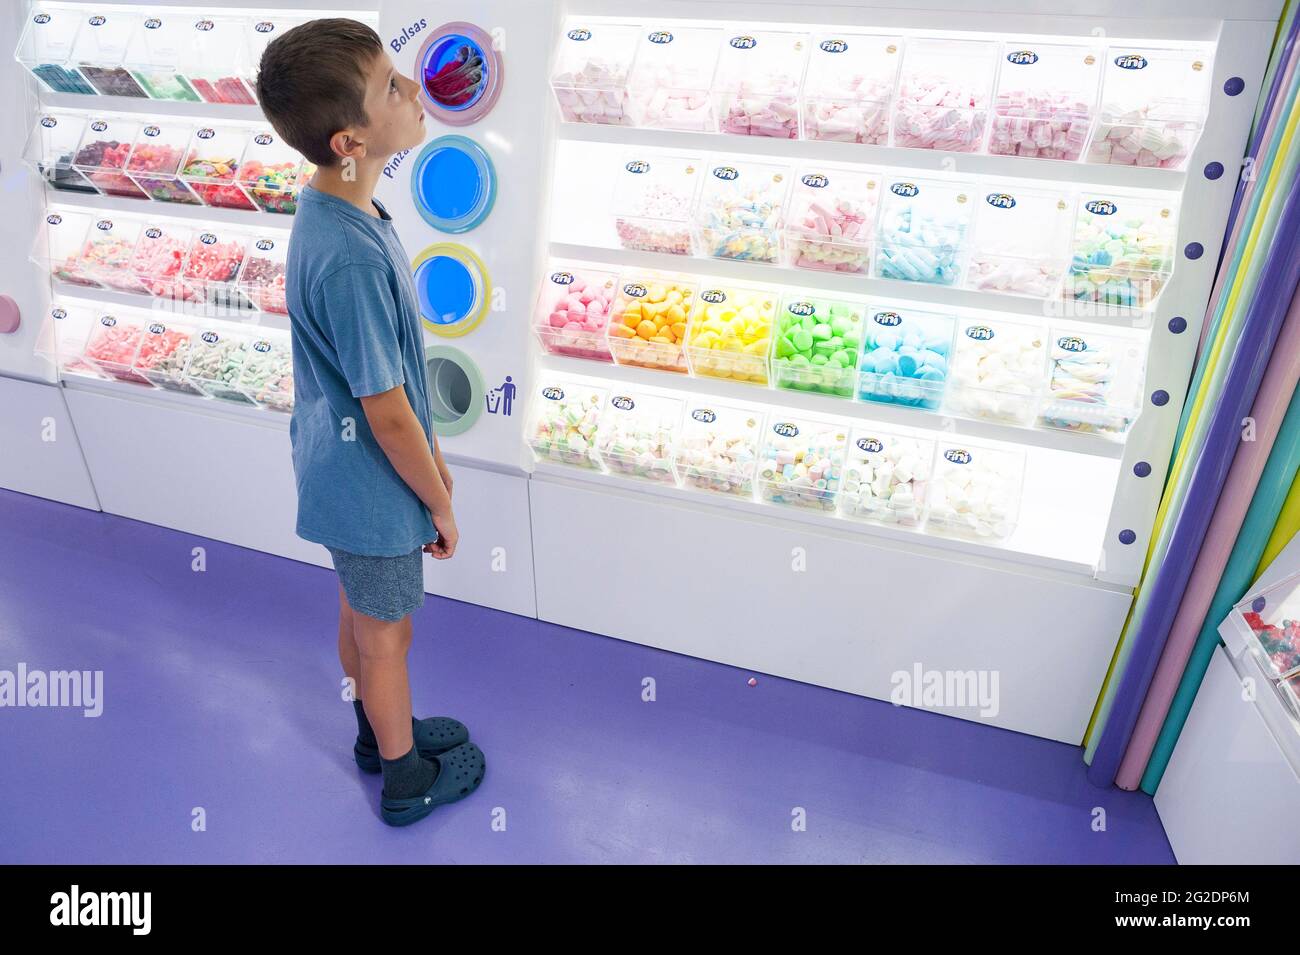 Kids in a sweet shop looking at the colourful display of treats Stock Photo